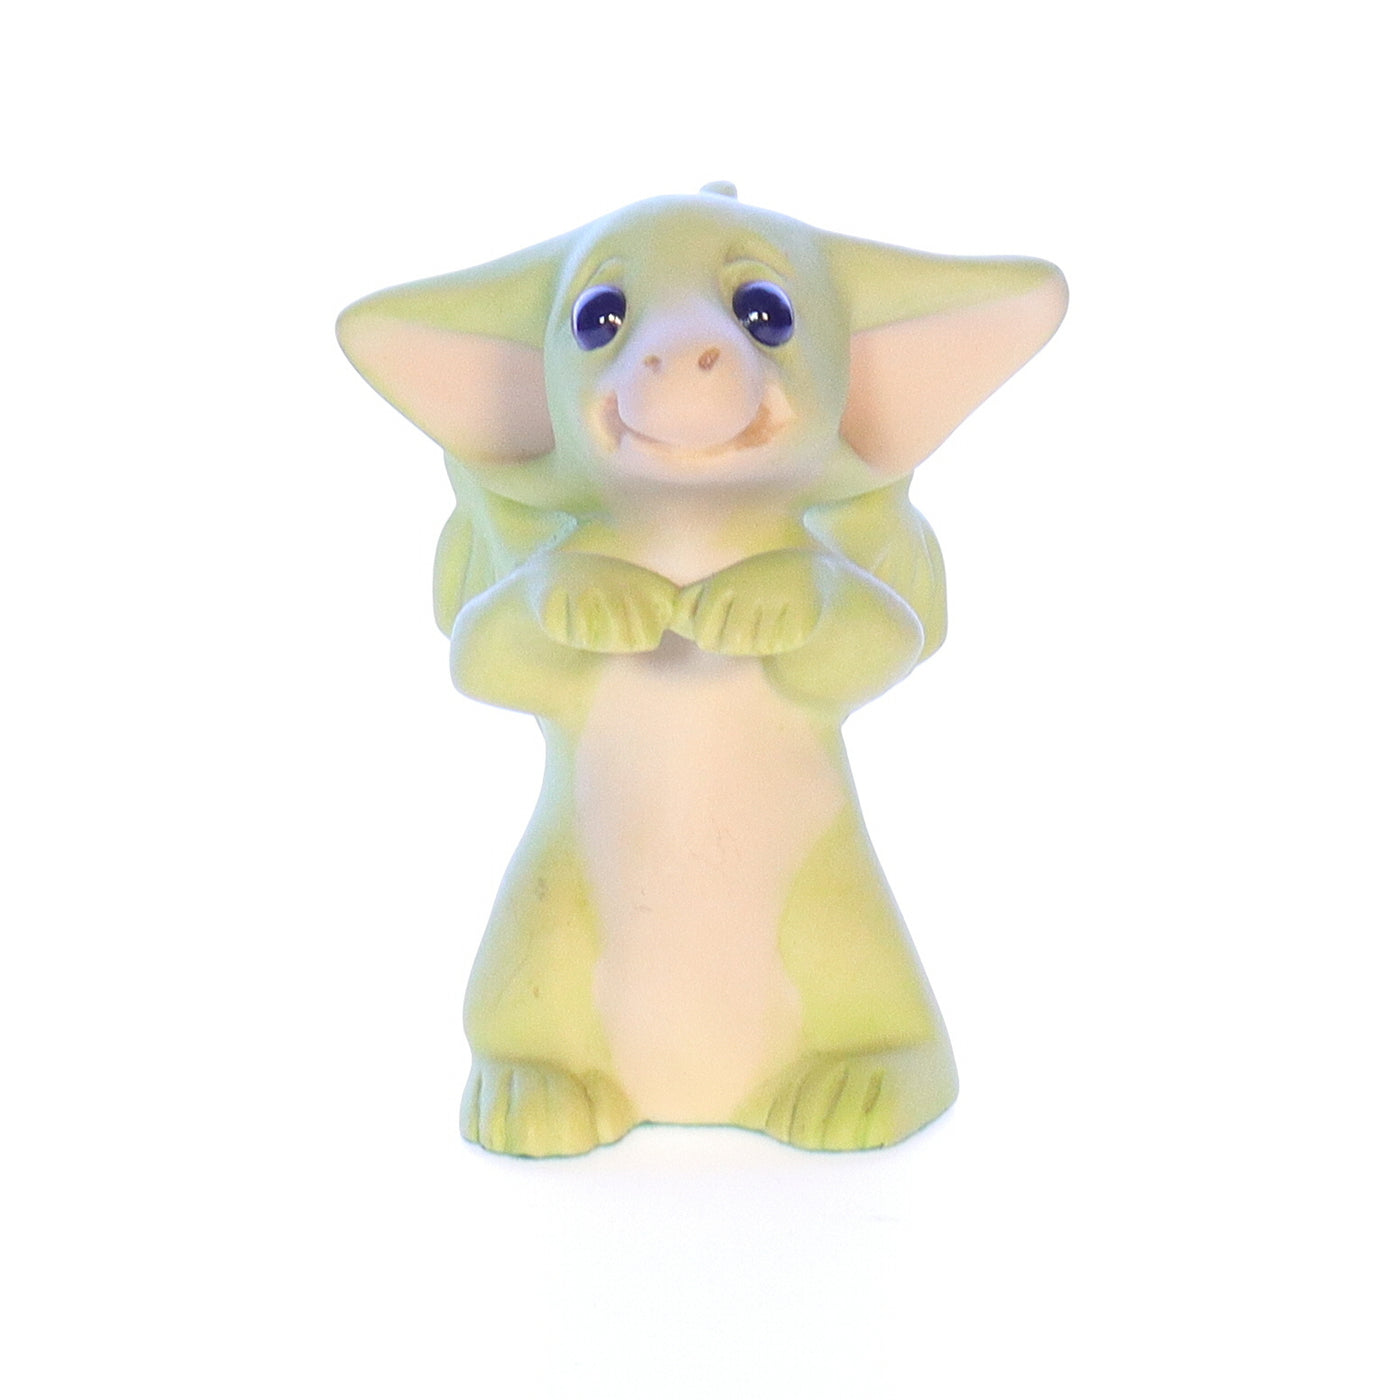 Whimsical_World_of_Pocket_Dragons_013841_Little_Beggar_Fantasy_Figurine_2001_Box Front View